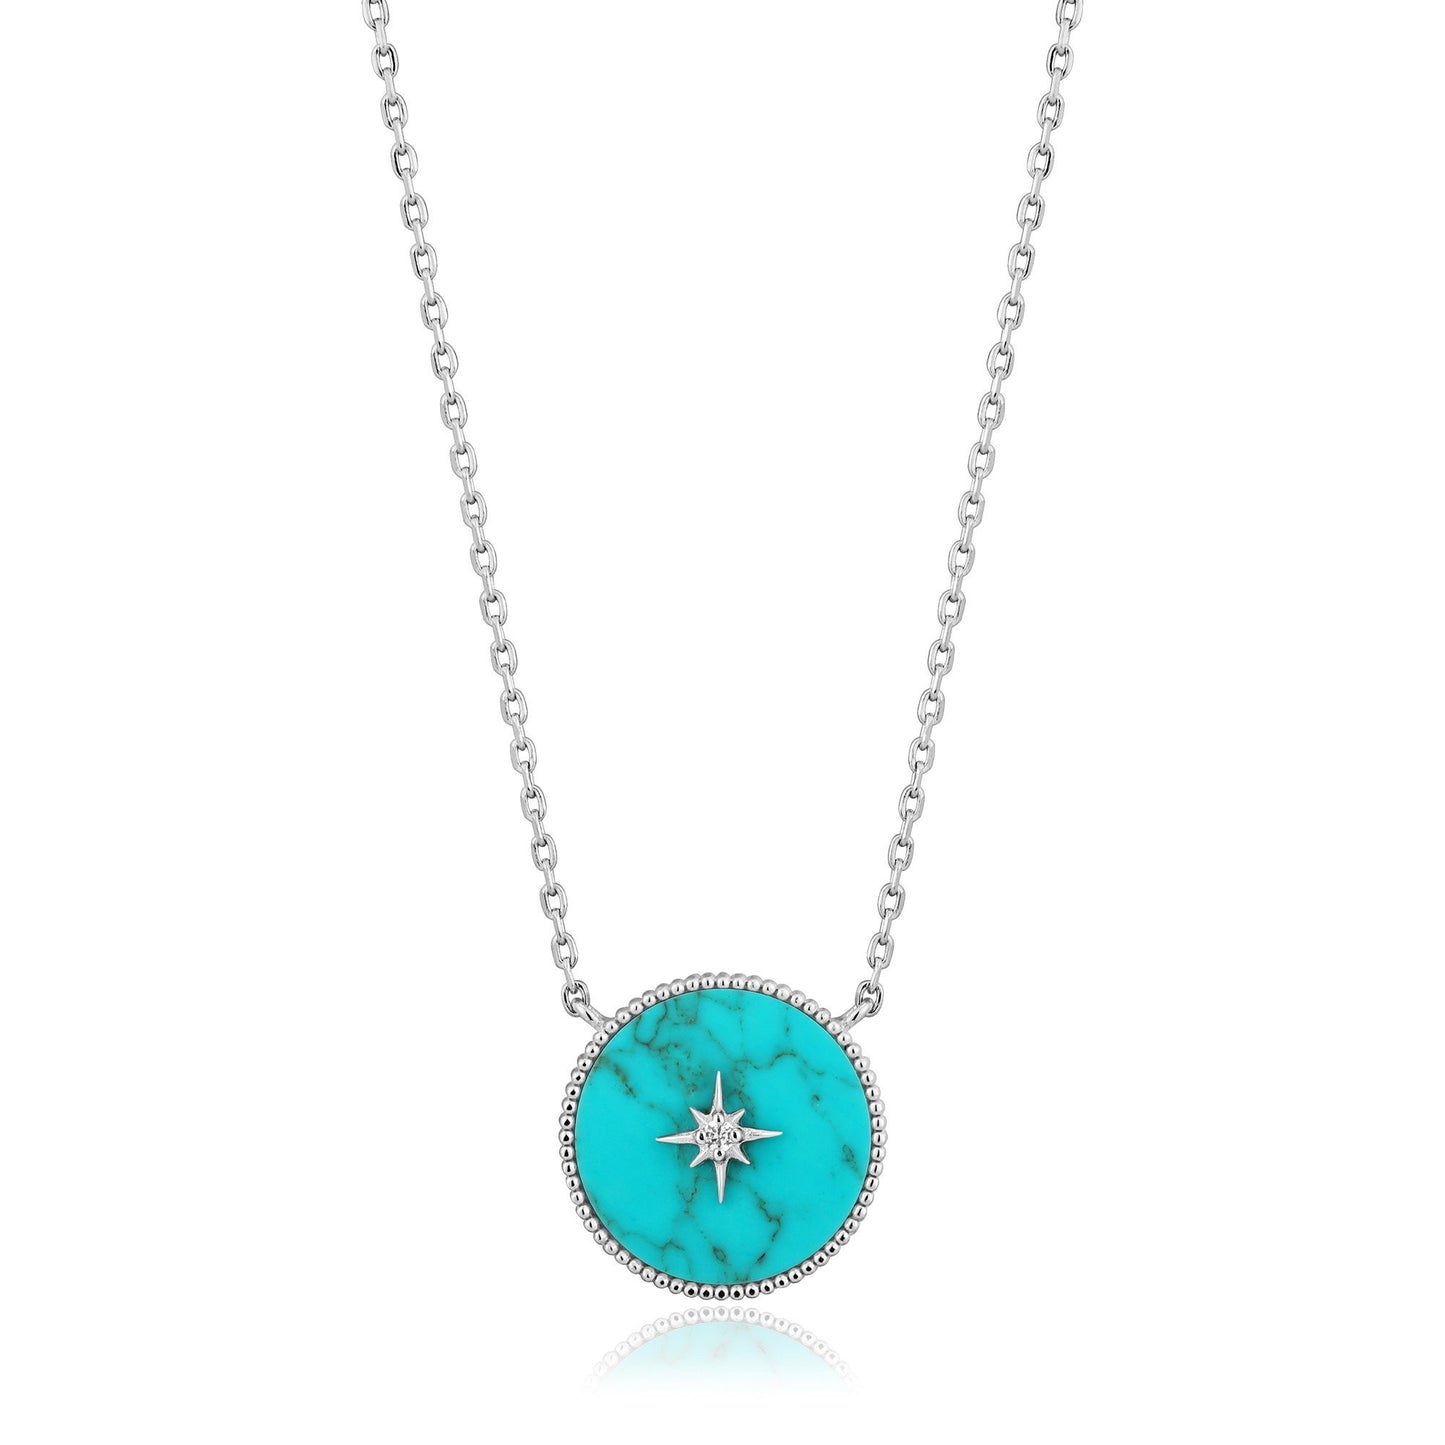 ANIA HAIE ANIA HAIE - Silver Turquoise Emblem Necklace available at The Good Life Boutique